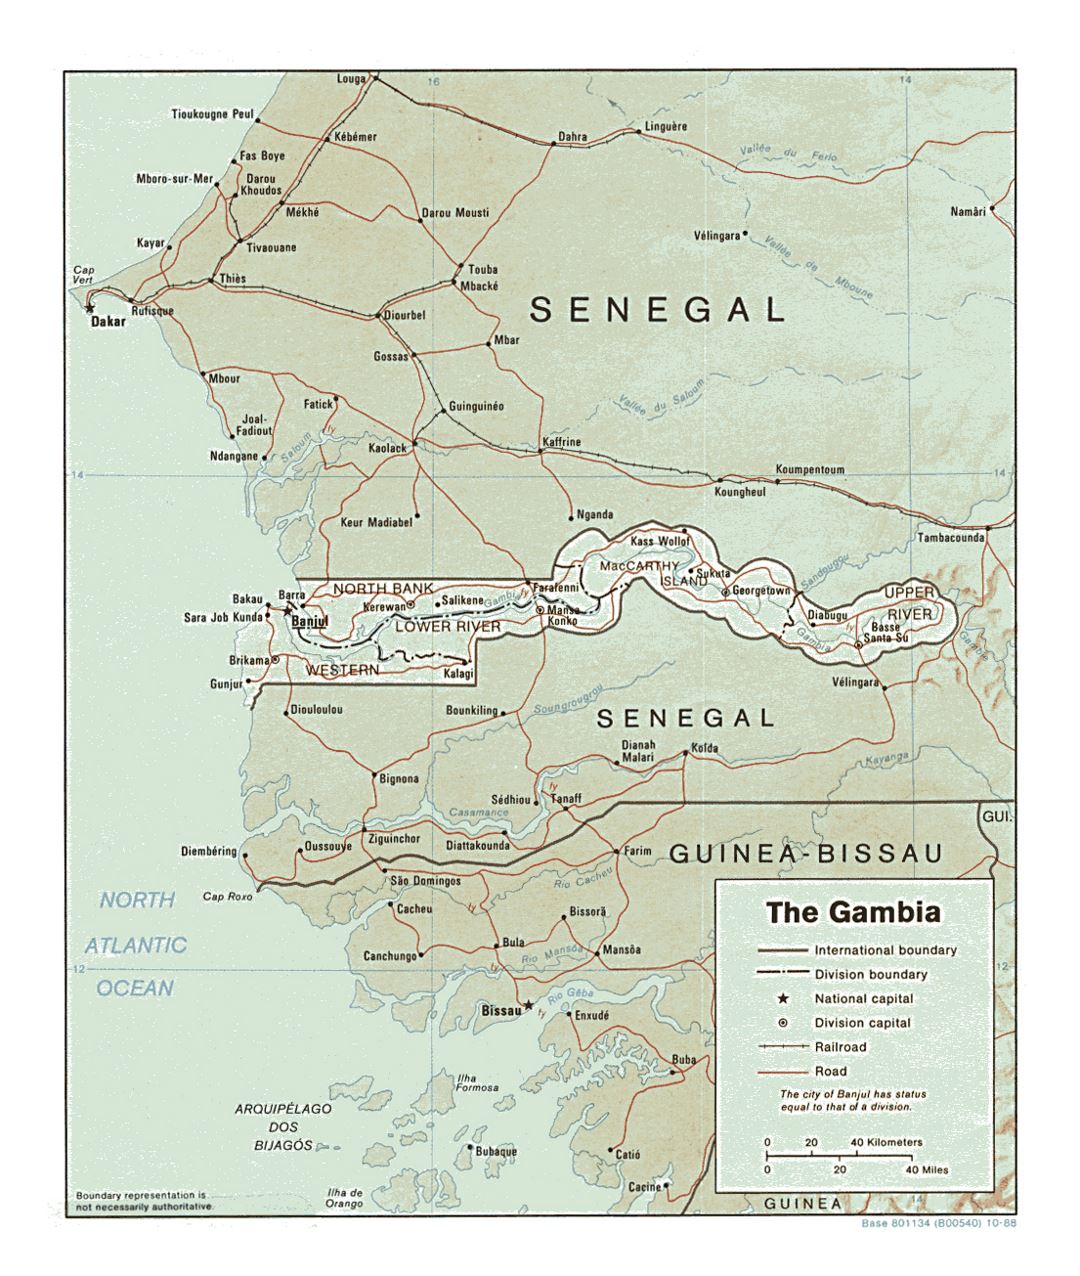 Detailed political and administrative map of Gambia with relief, roads, railroads and major cities - 1988